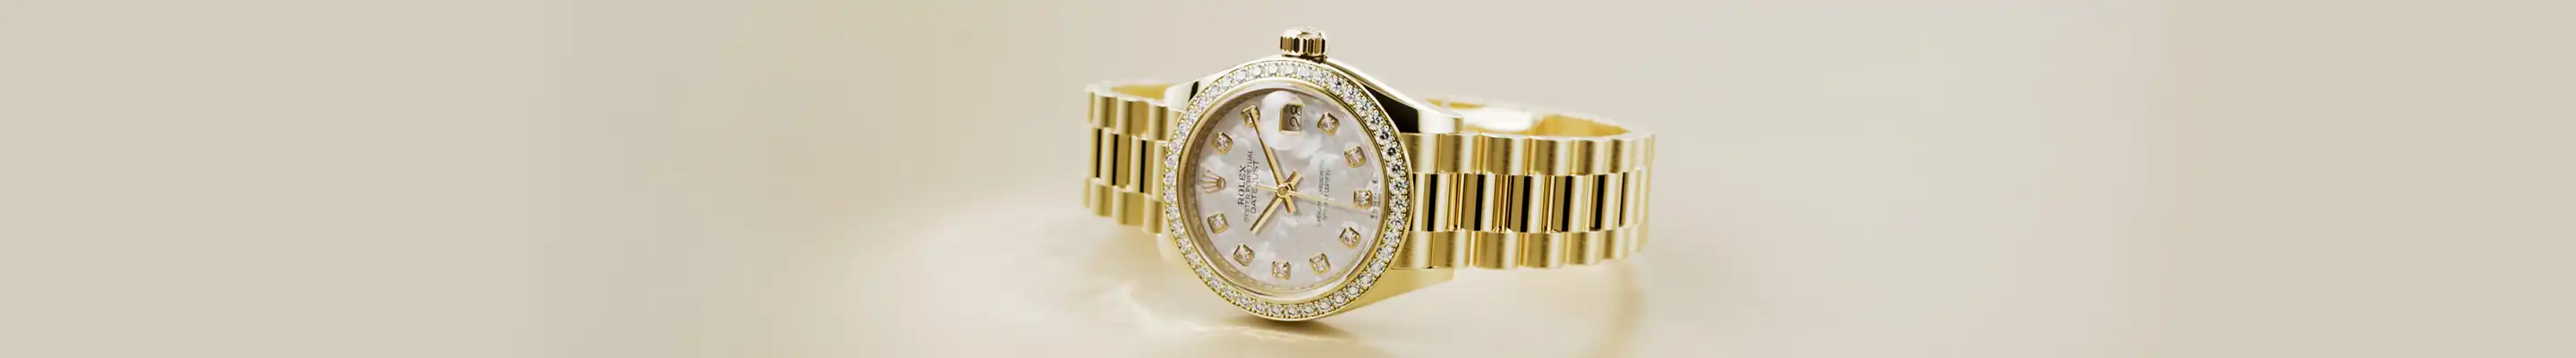 Rolex - Article: The Lady-Datejust